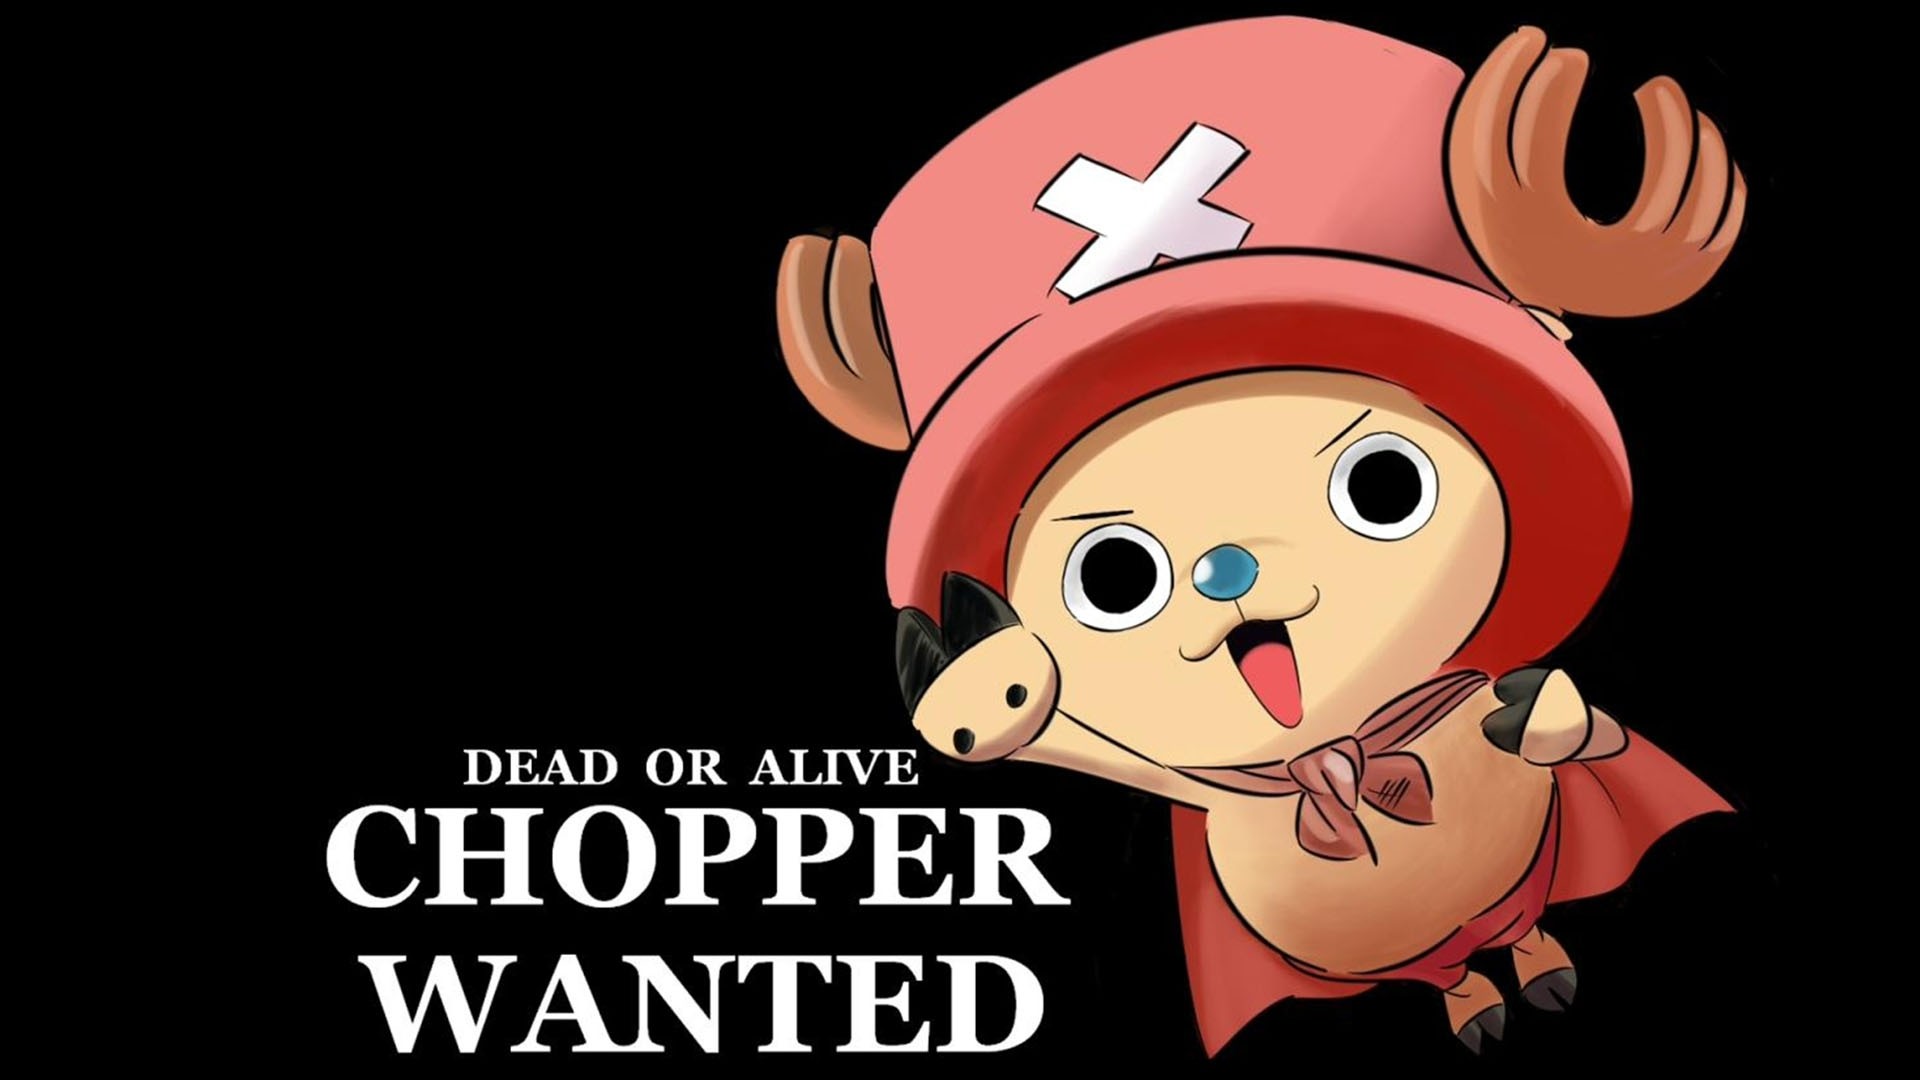 1920x1080 One Piece Chopper Free Wallpapers 10736 - HD Wallpapers Site